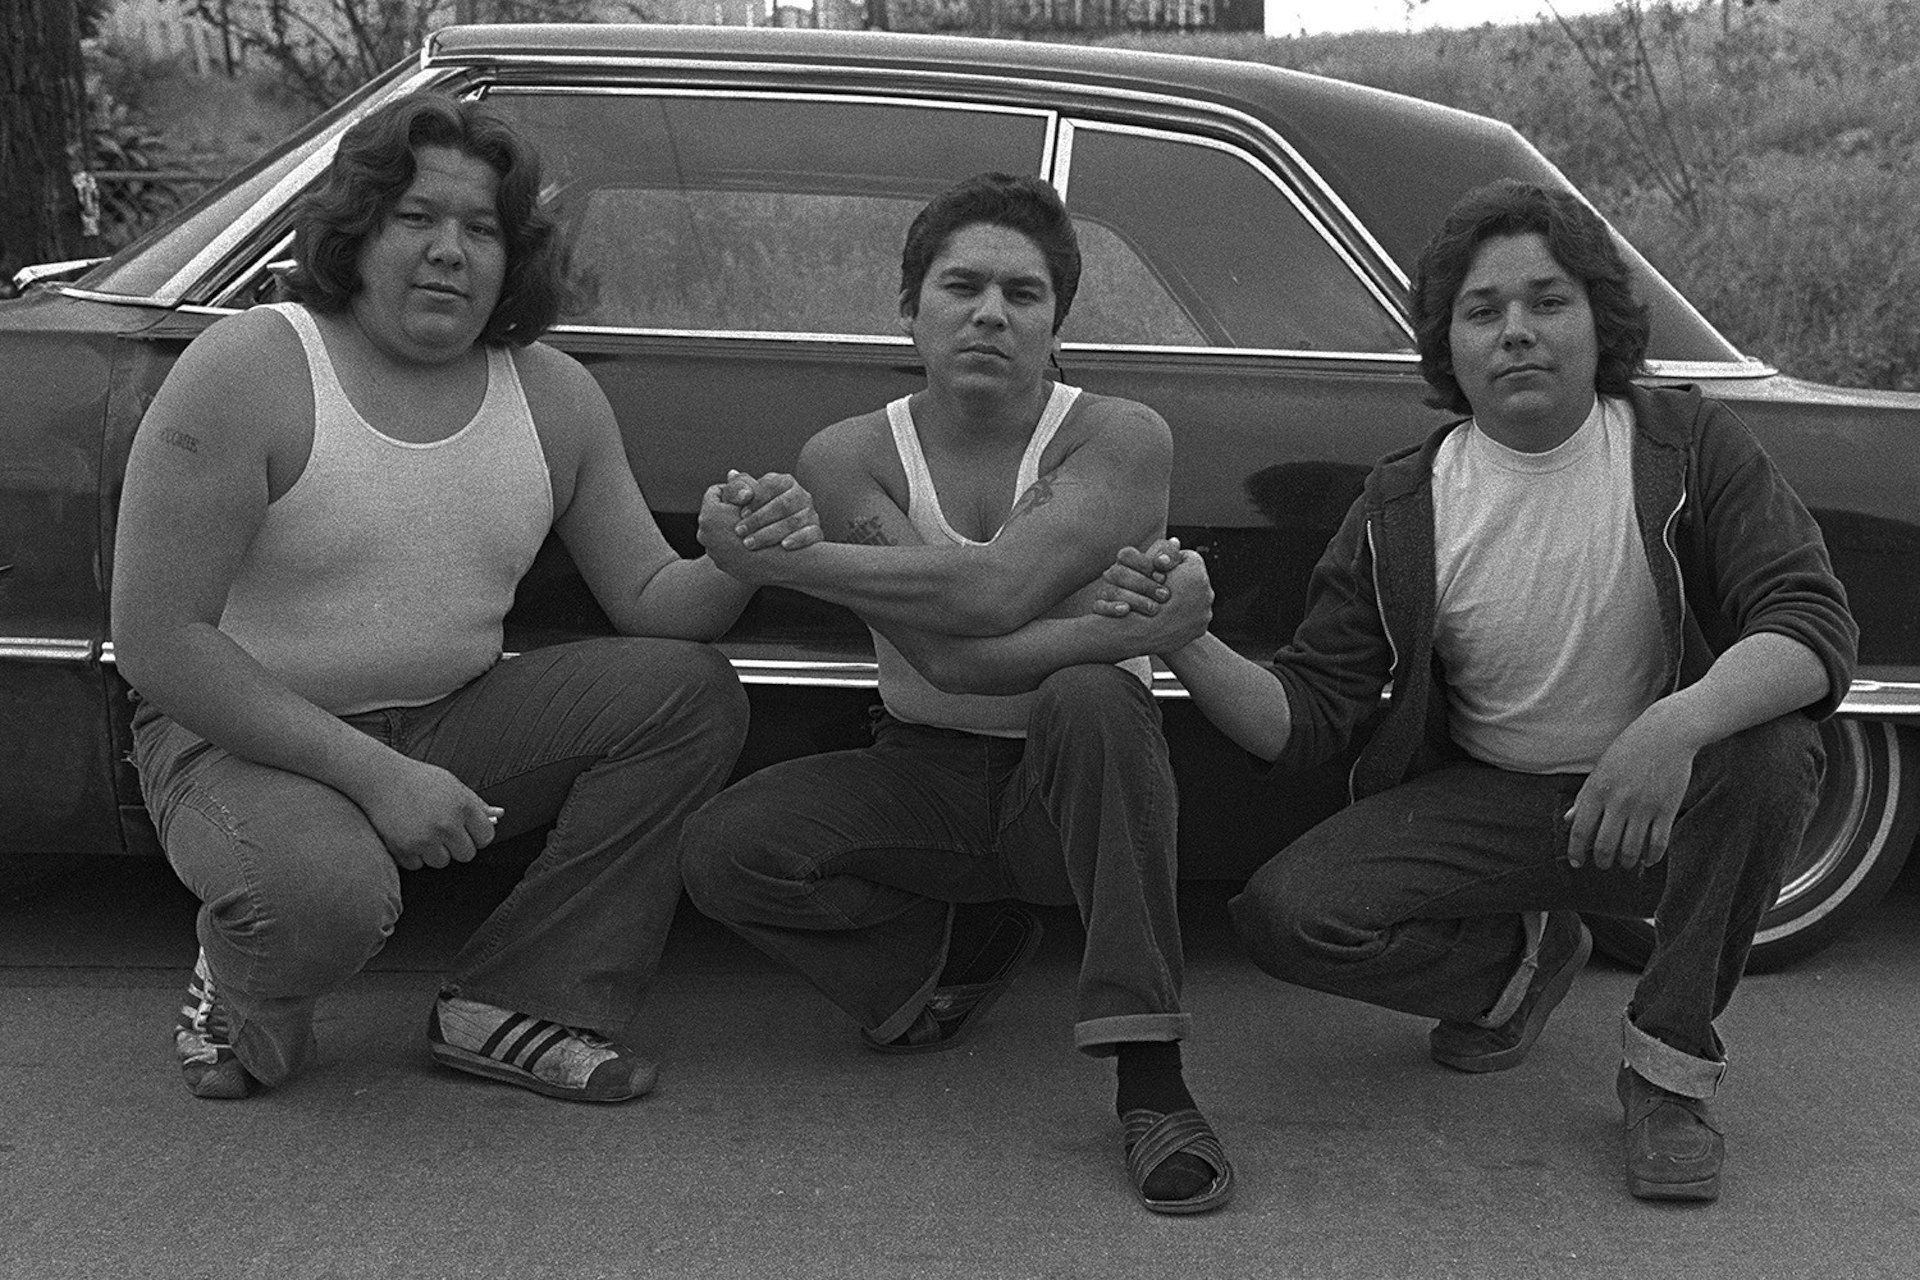 Down and out in east LA: vintage shots of Chicano life